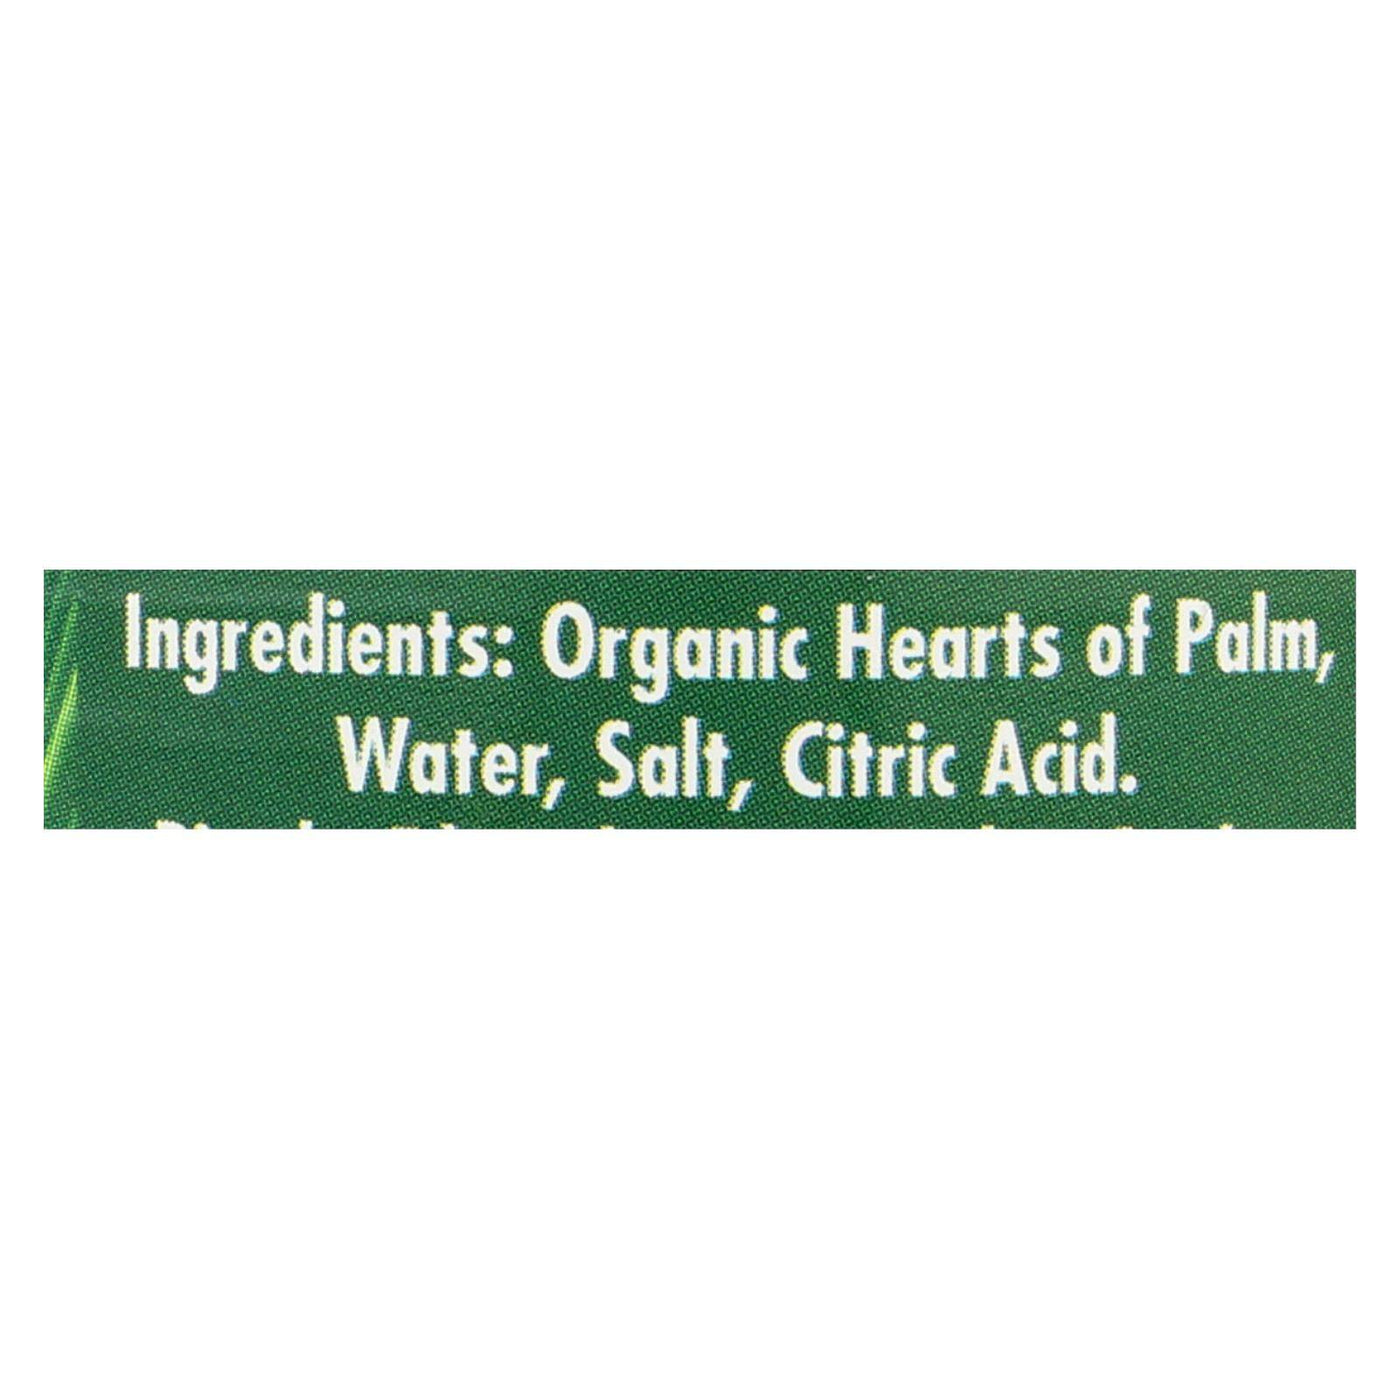 Buy Native Forest Organic Hearts - Palm - Case Of 12 - 14 Oz.  at OnlyNaturals.us